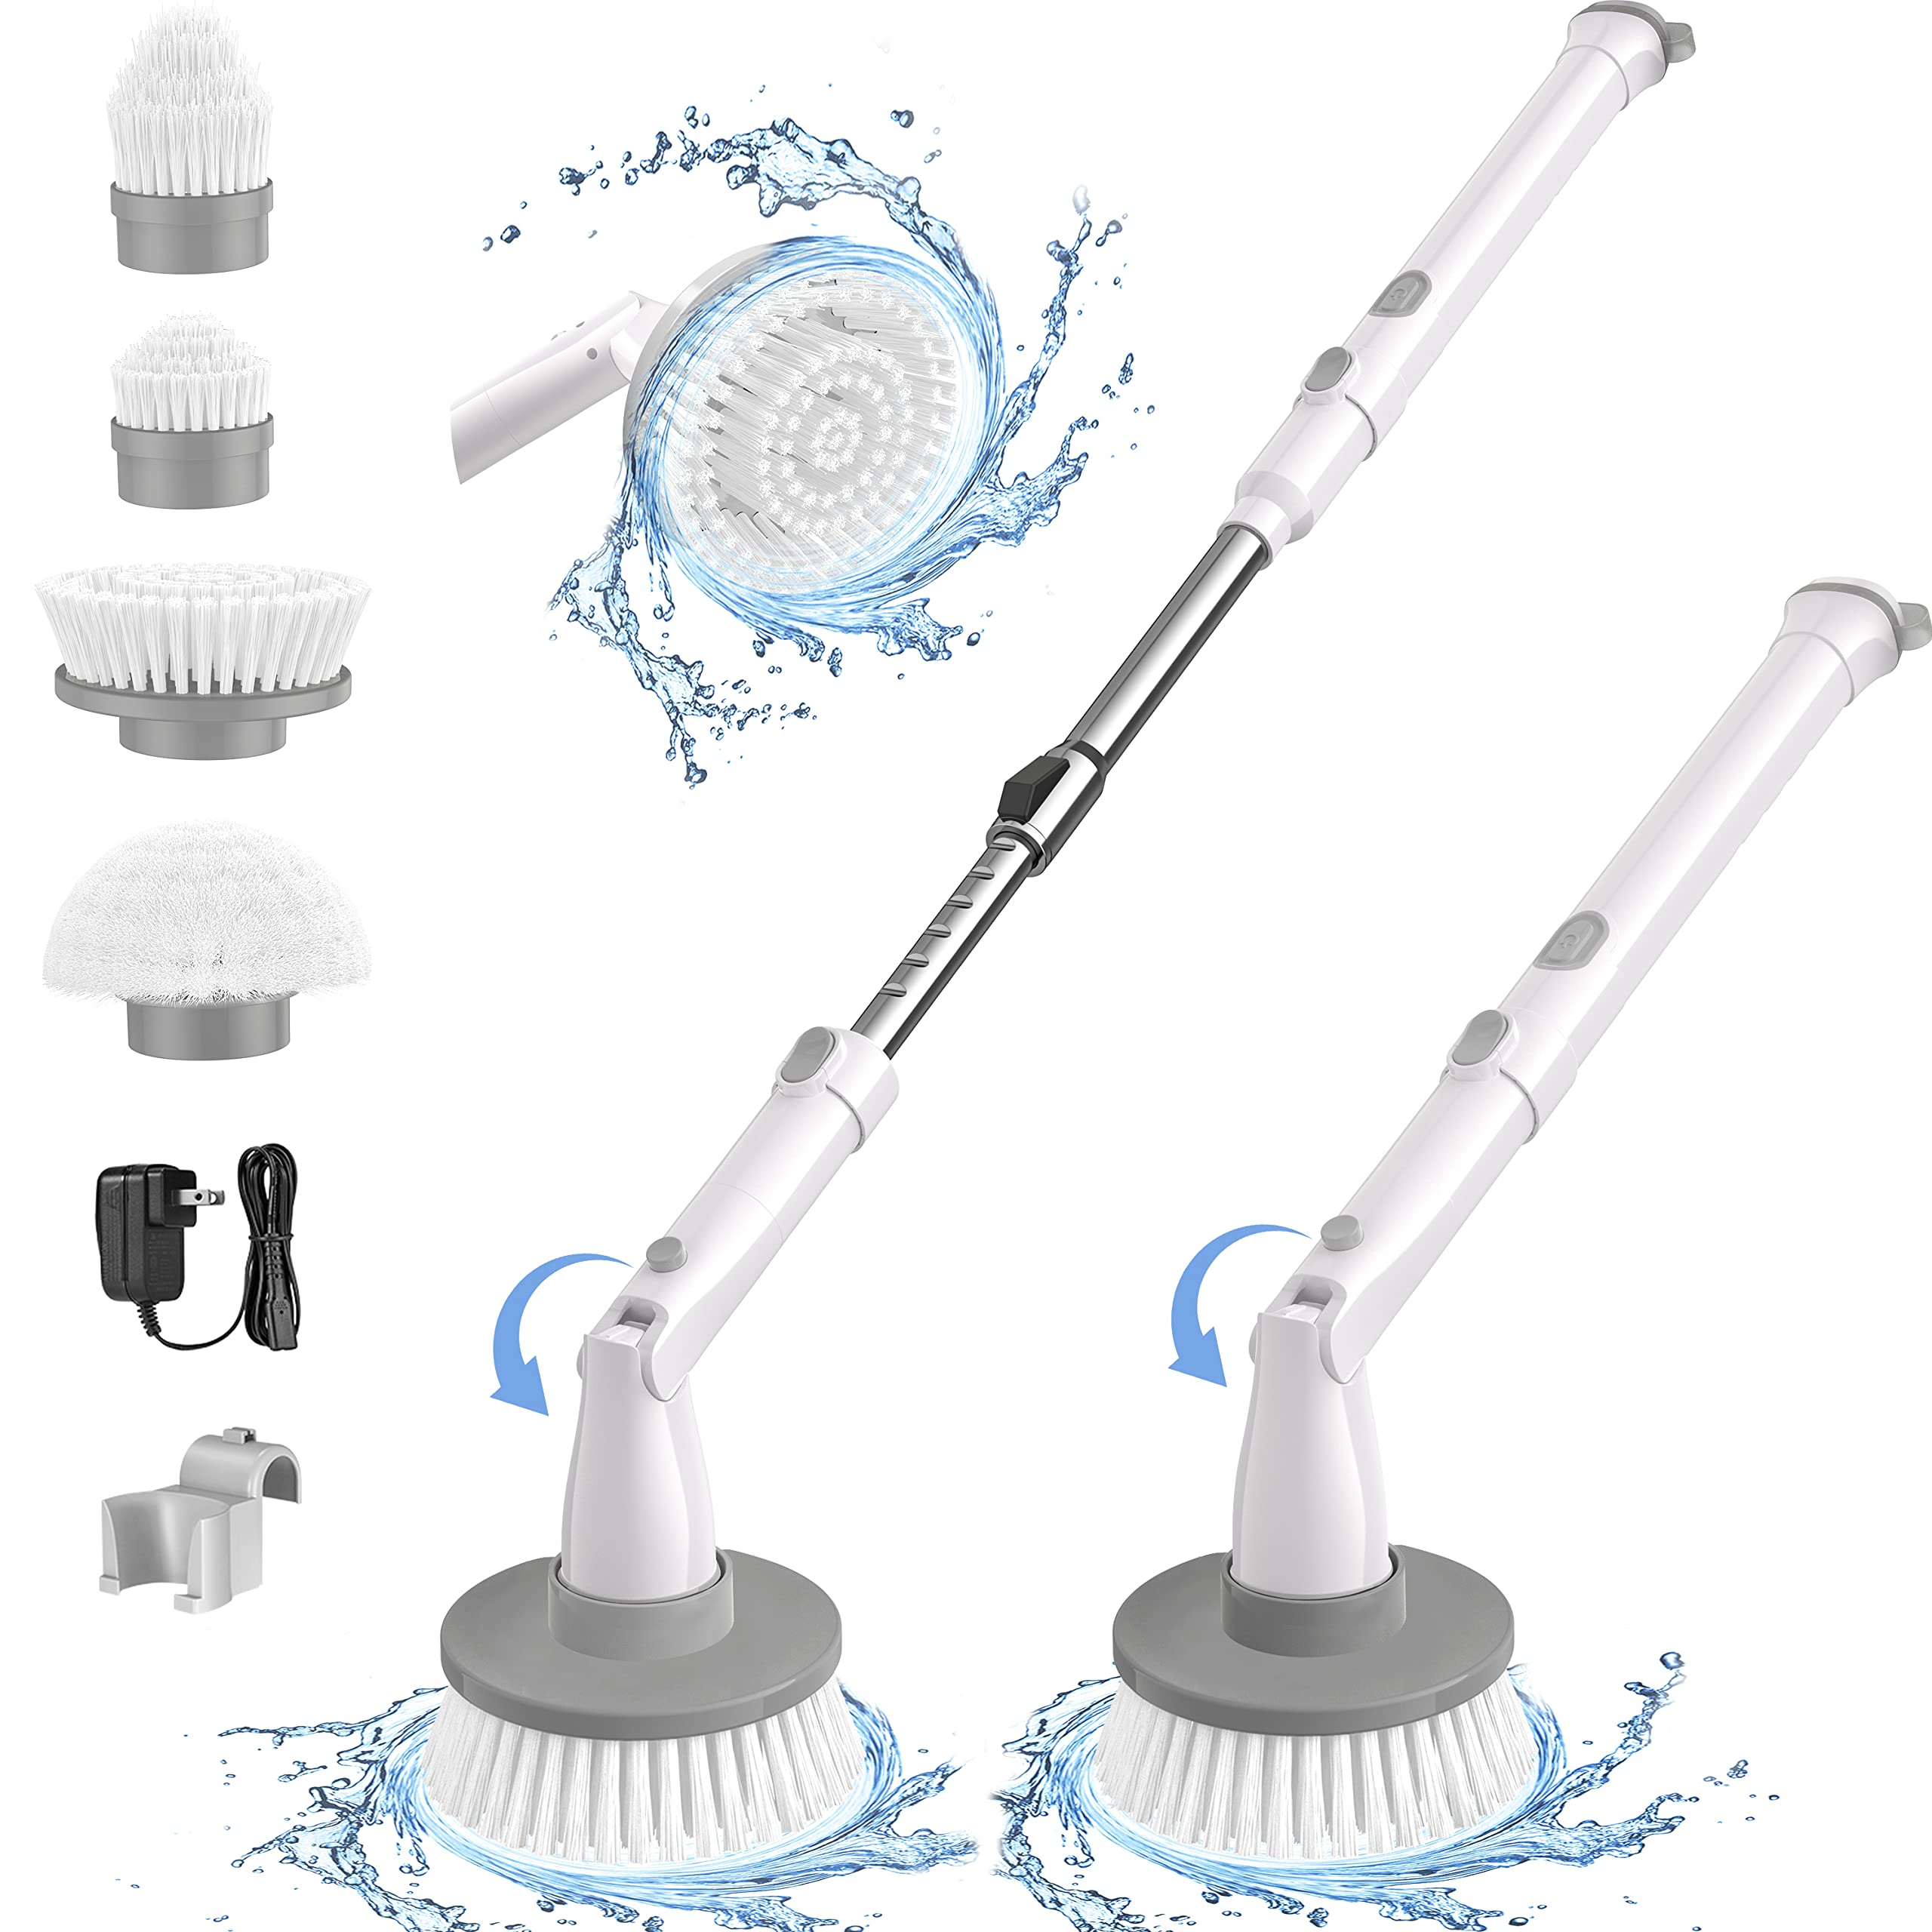 kHelfer Electric Spin Scrubber, Khelfer Kh8W Cordless Shower Scrubber With  4 Replacement Head, 1.5H Bathroom Scrubber With Dual Speed, H